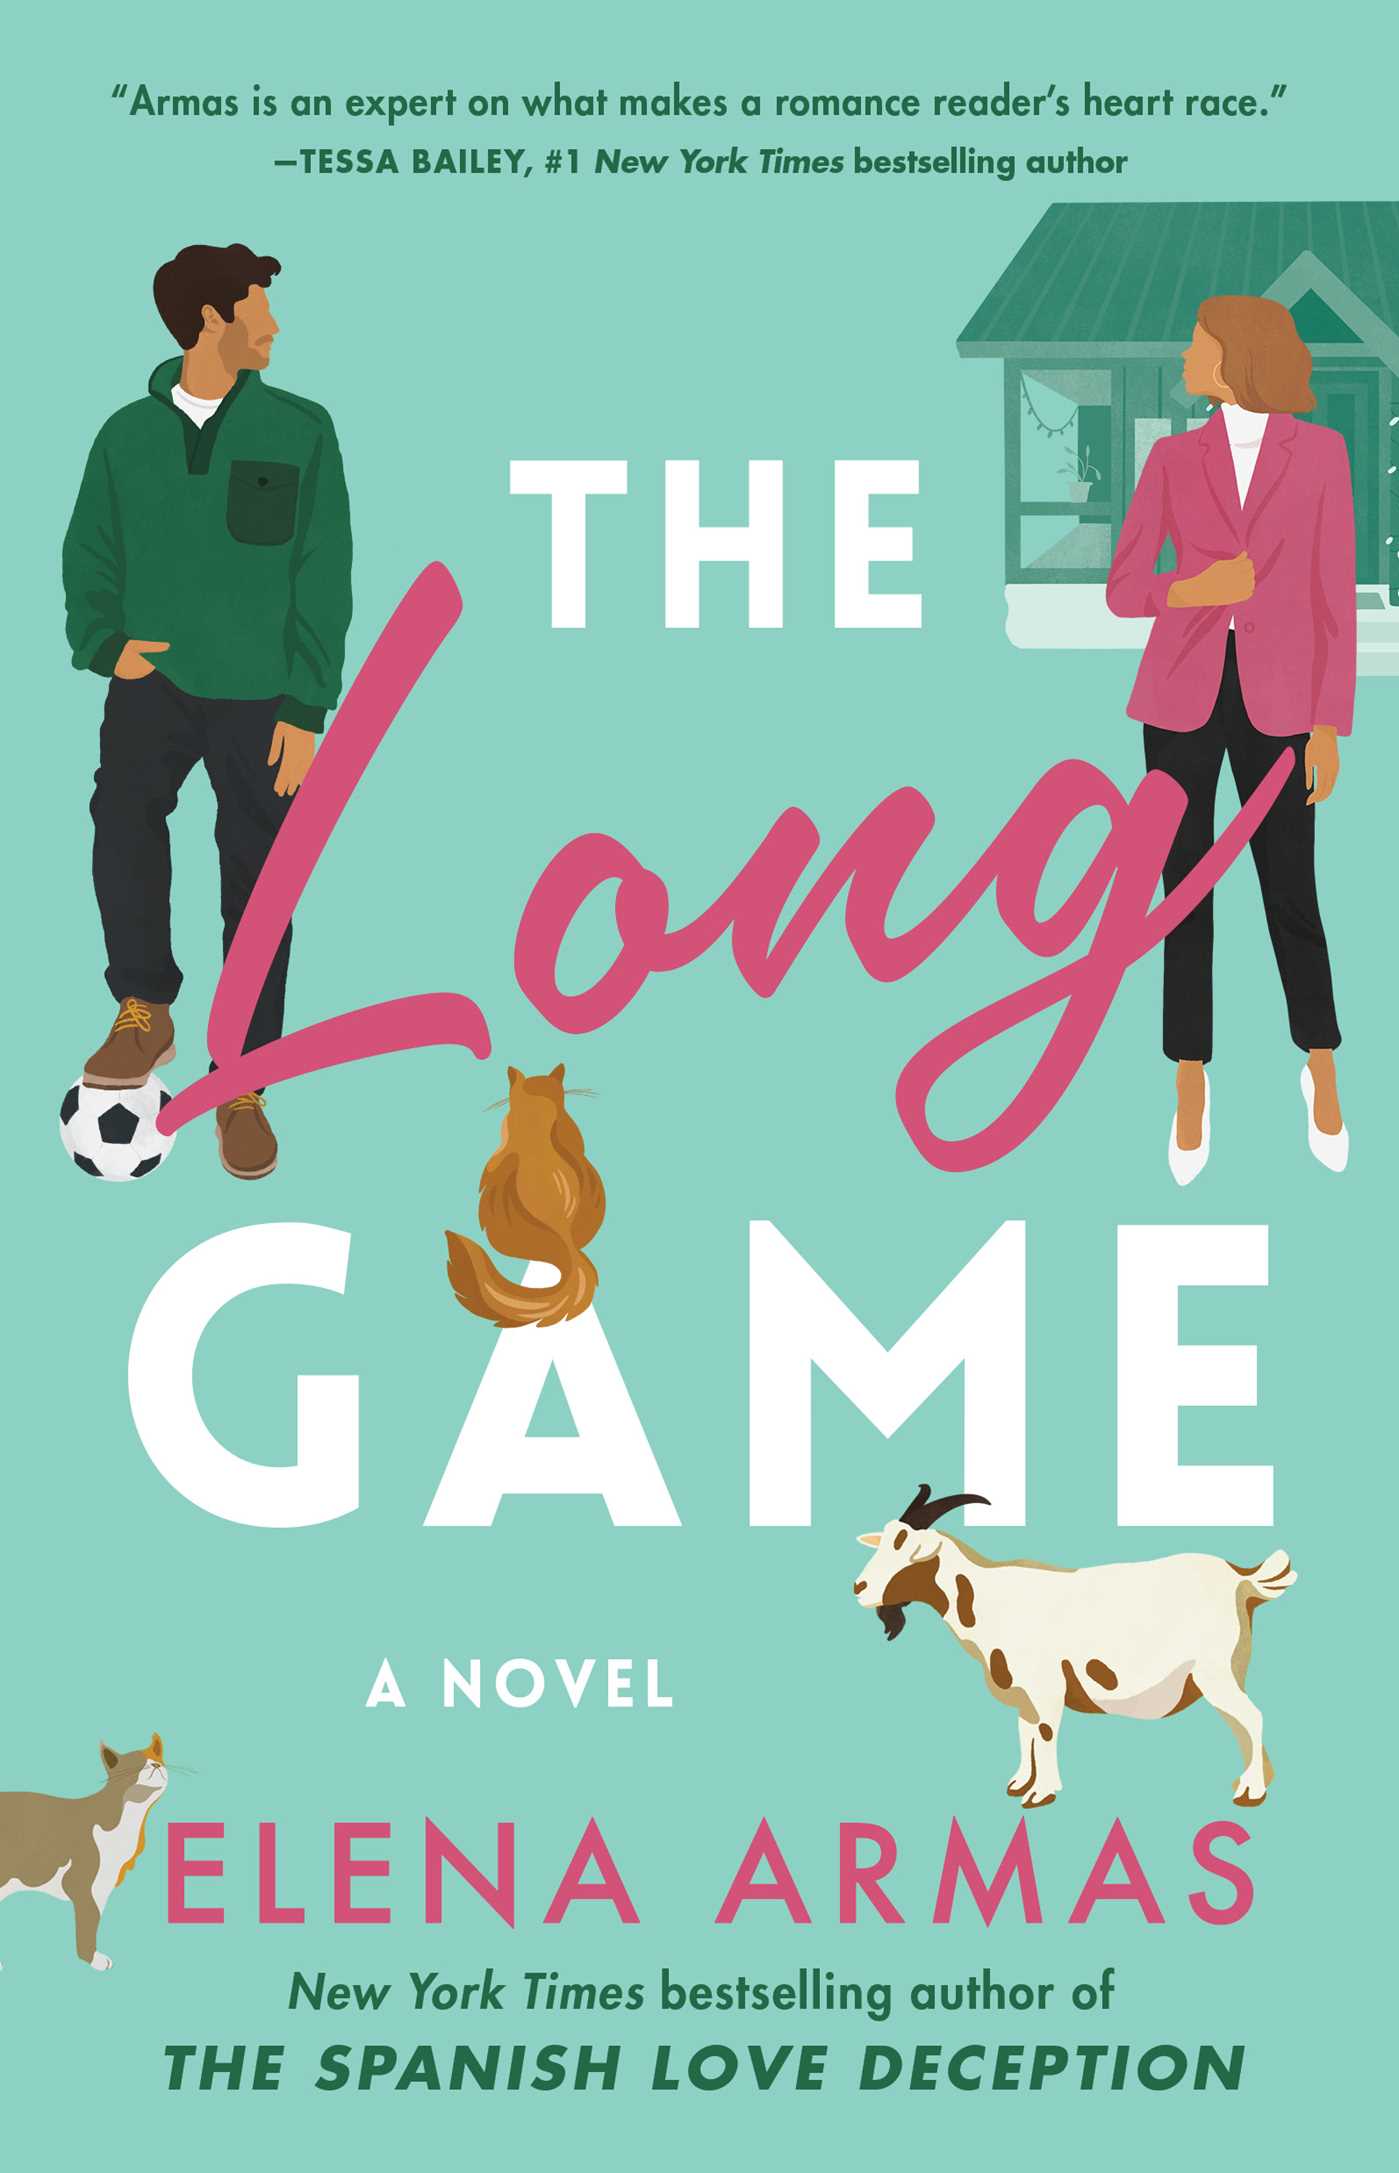 image for "The Long Game"